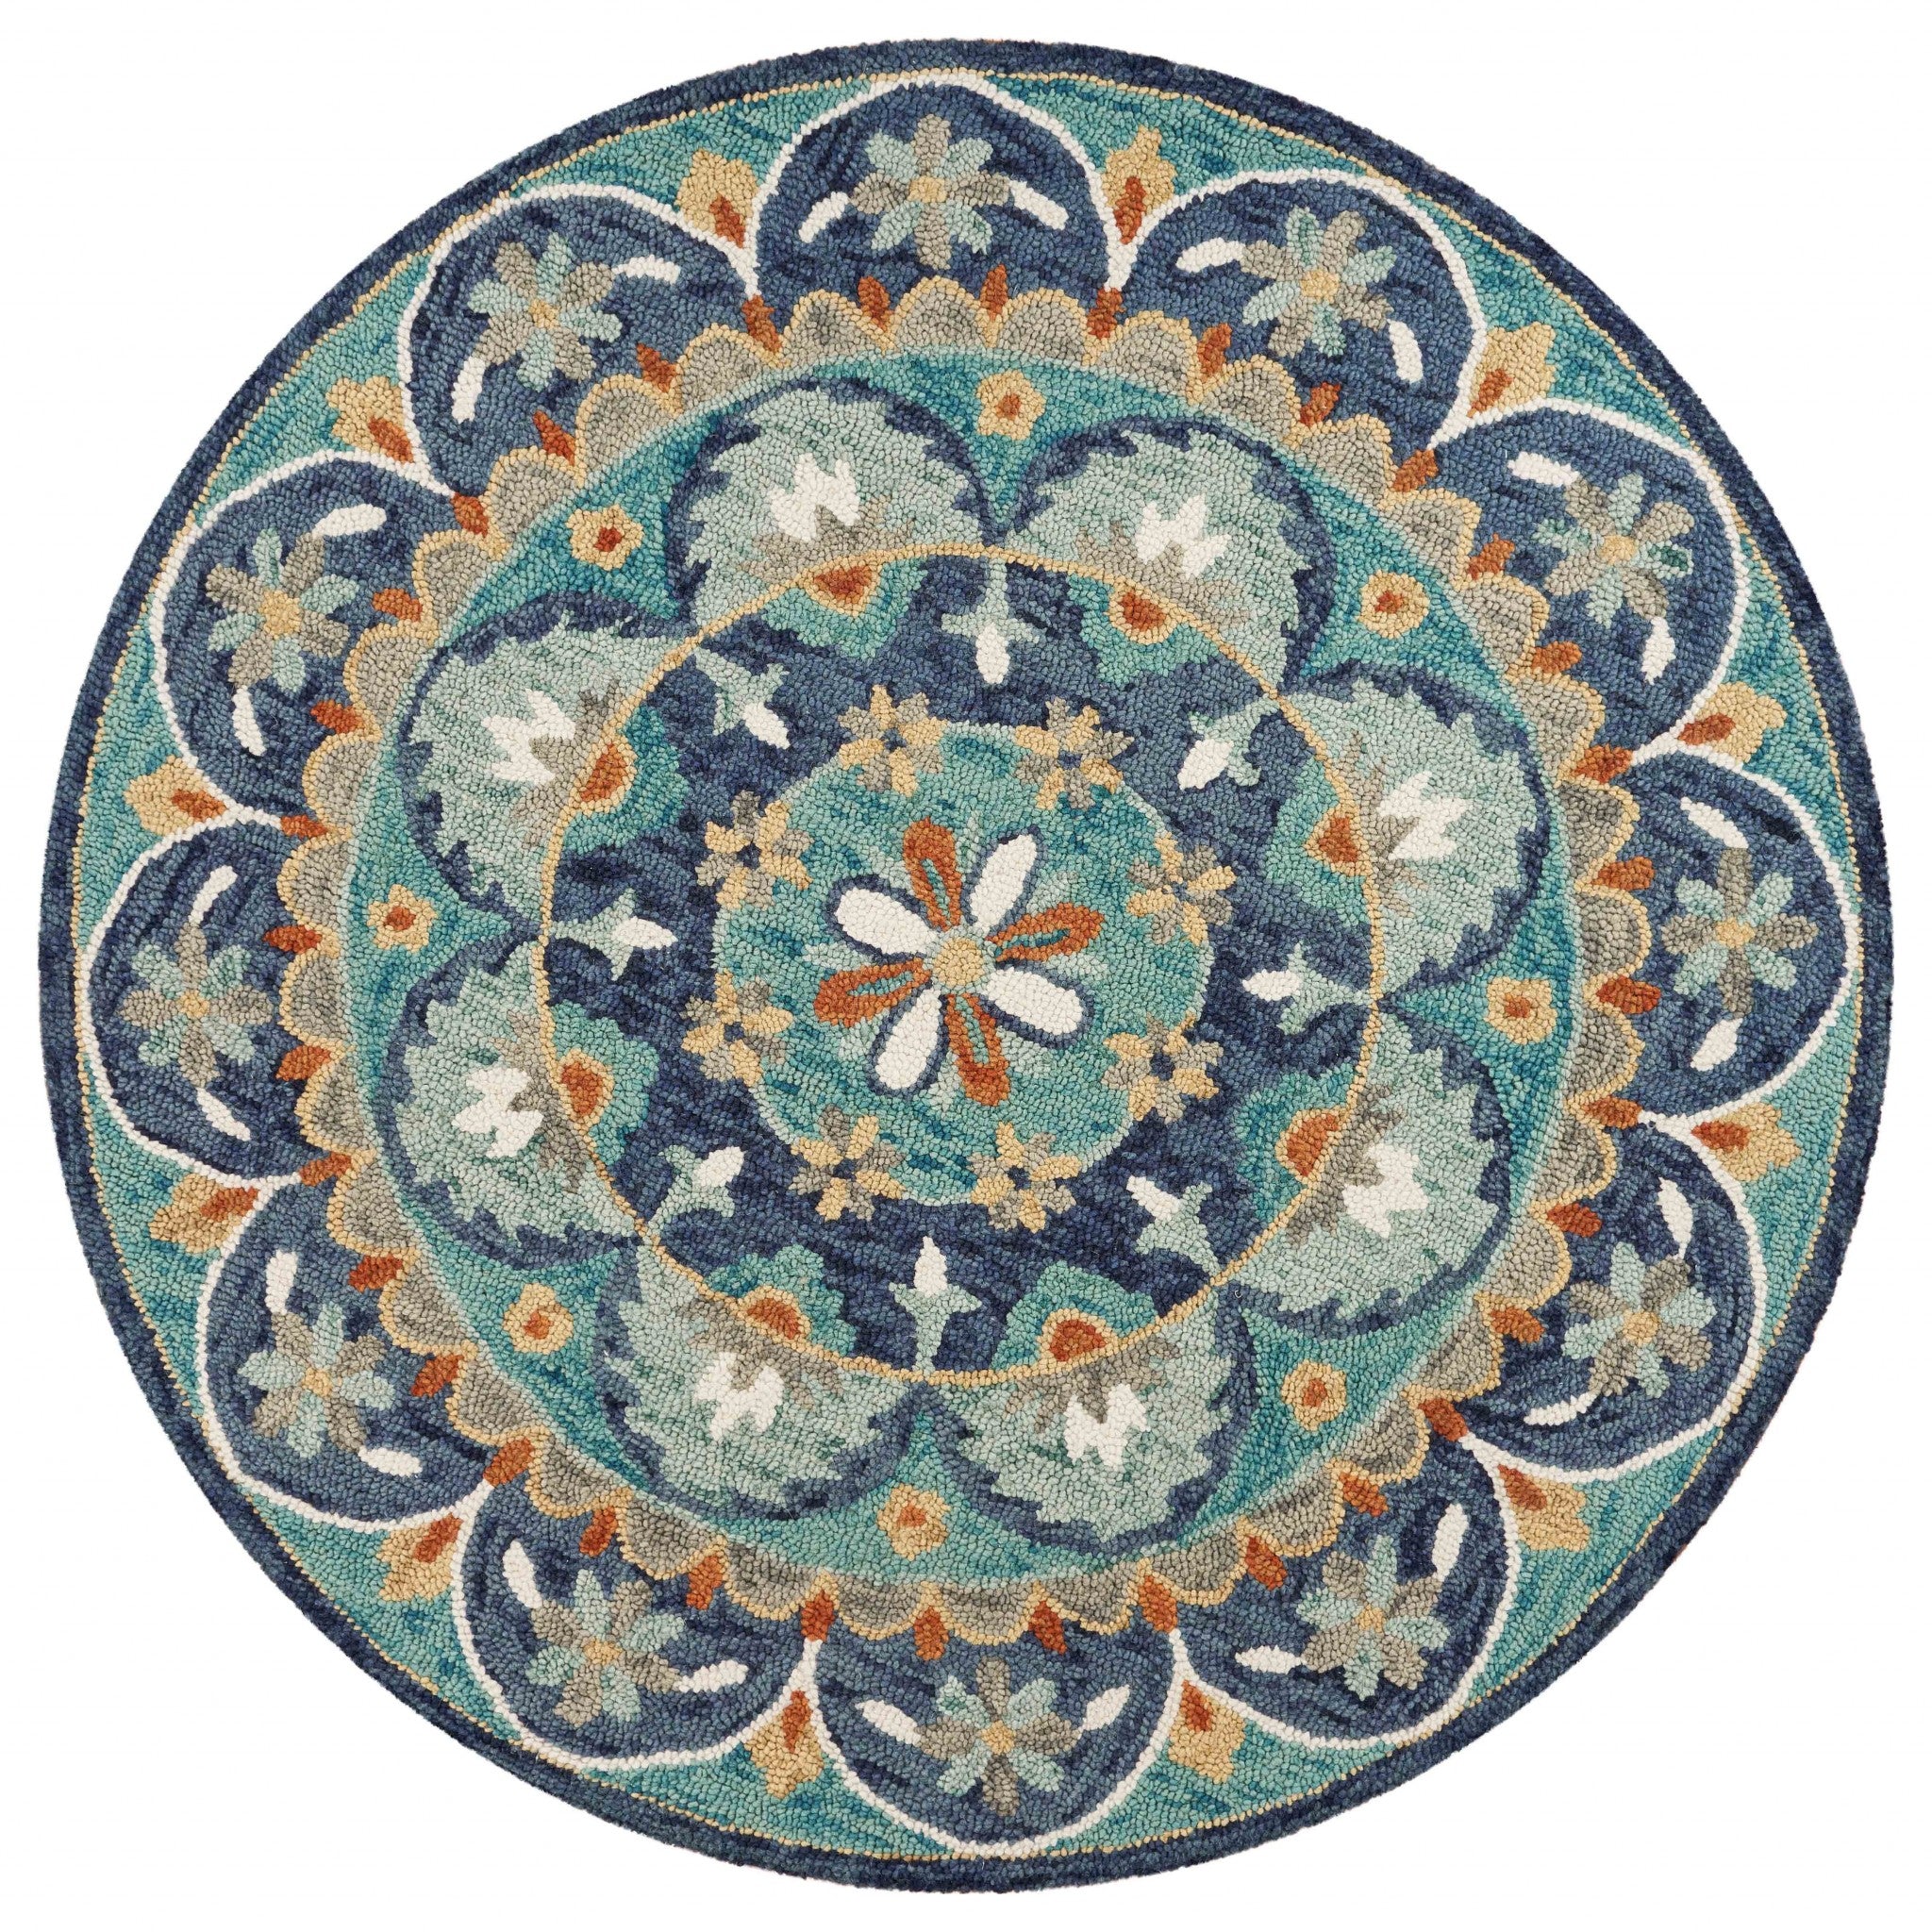 6' Blue And Green Round Wool Floral Hand Tufted Area Rug